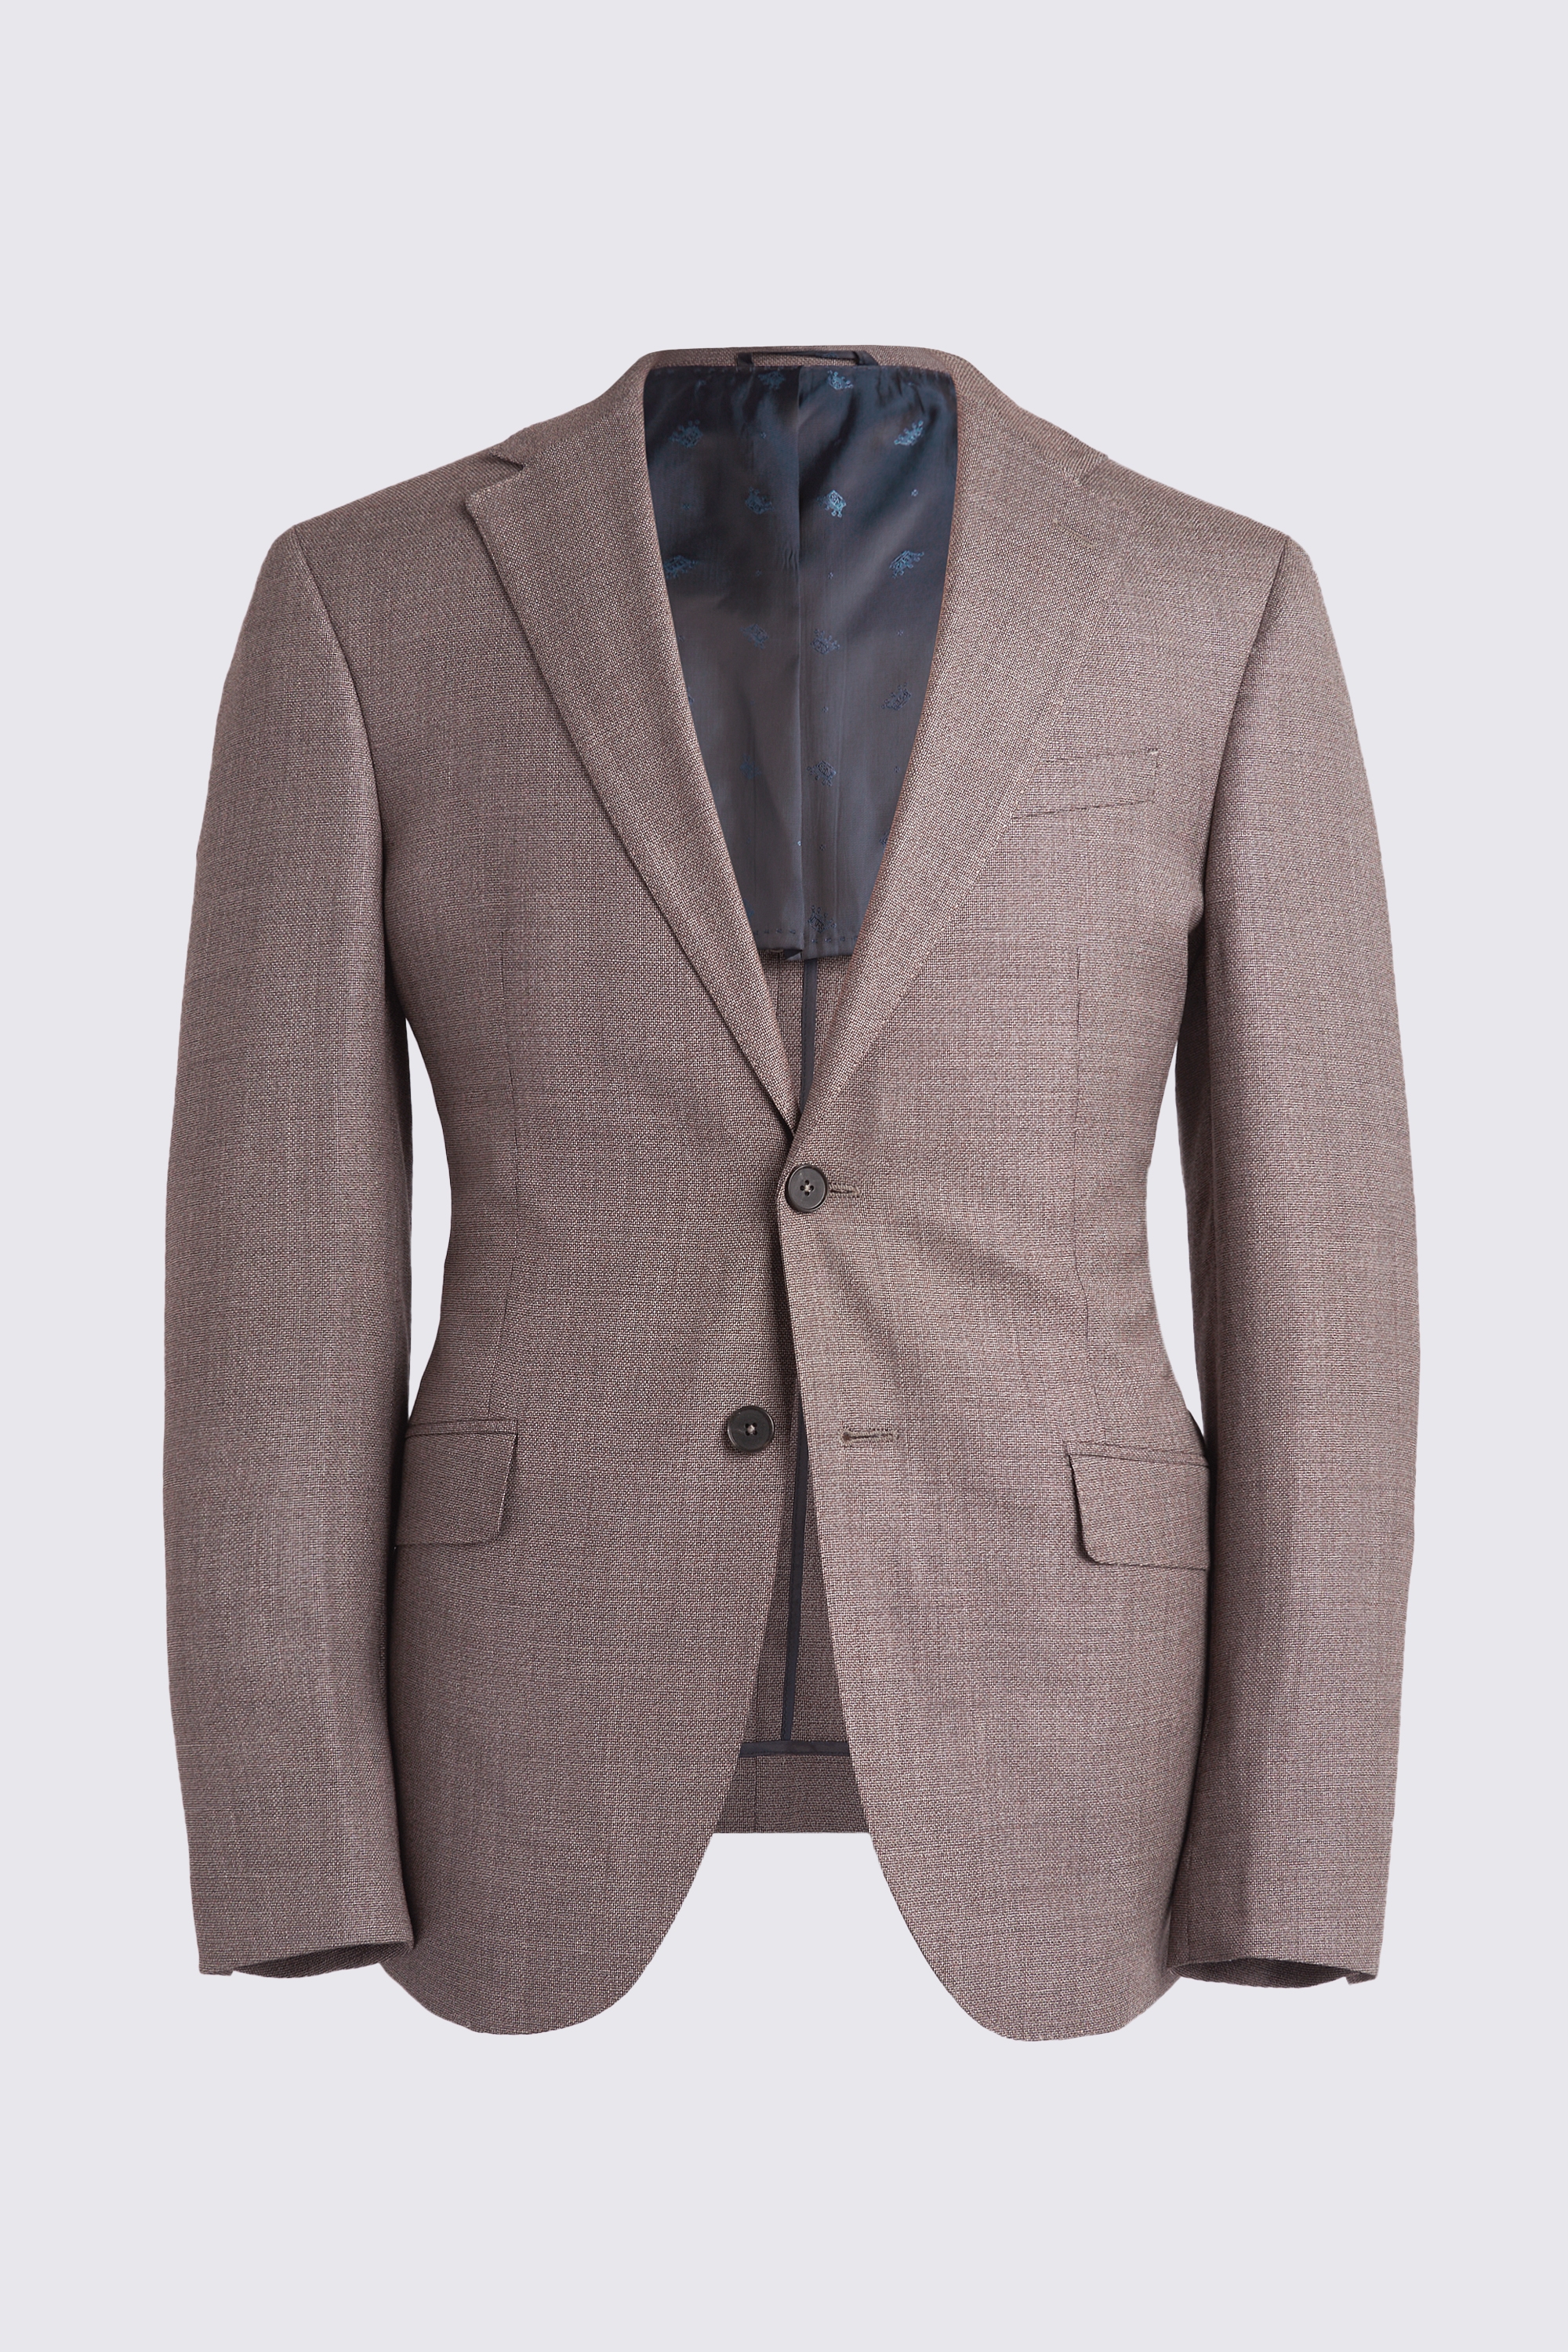 Italian Slim Fit Taupe Hopsack Jacket | Buy Online at Moss